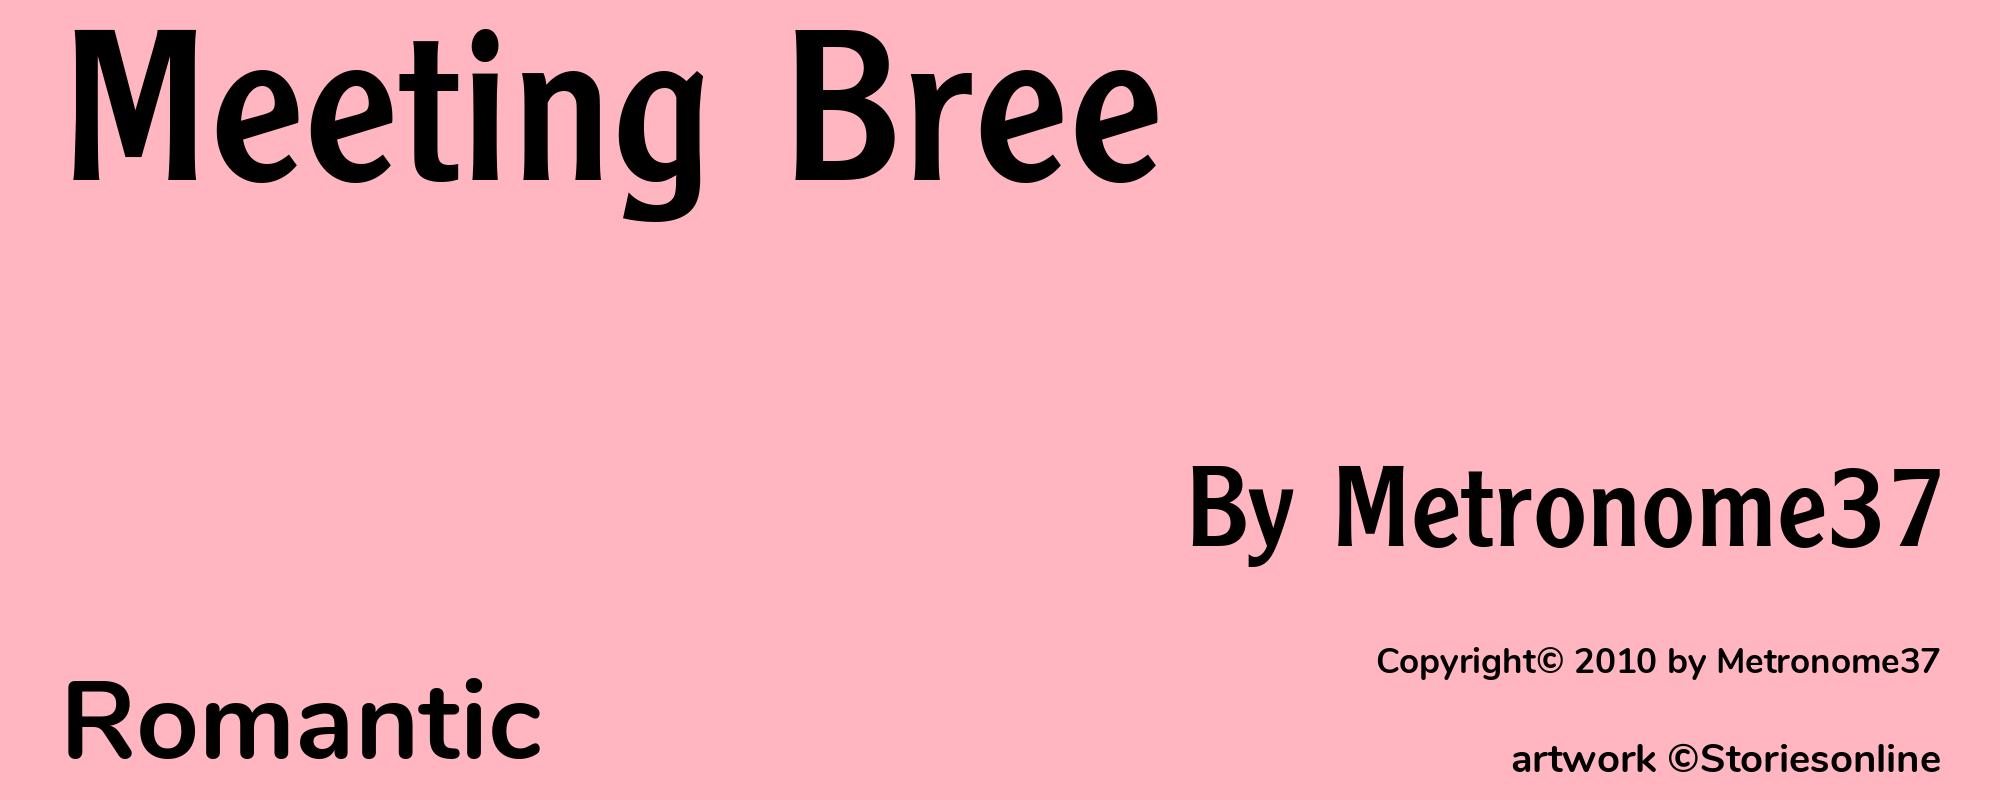 Meeting Bree - Cover